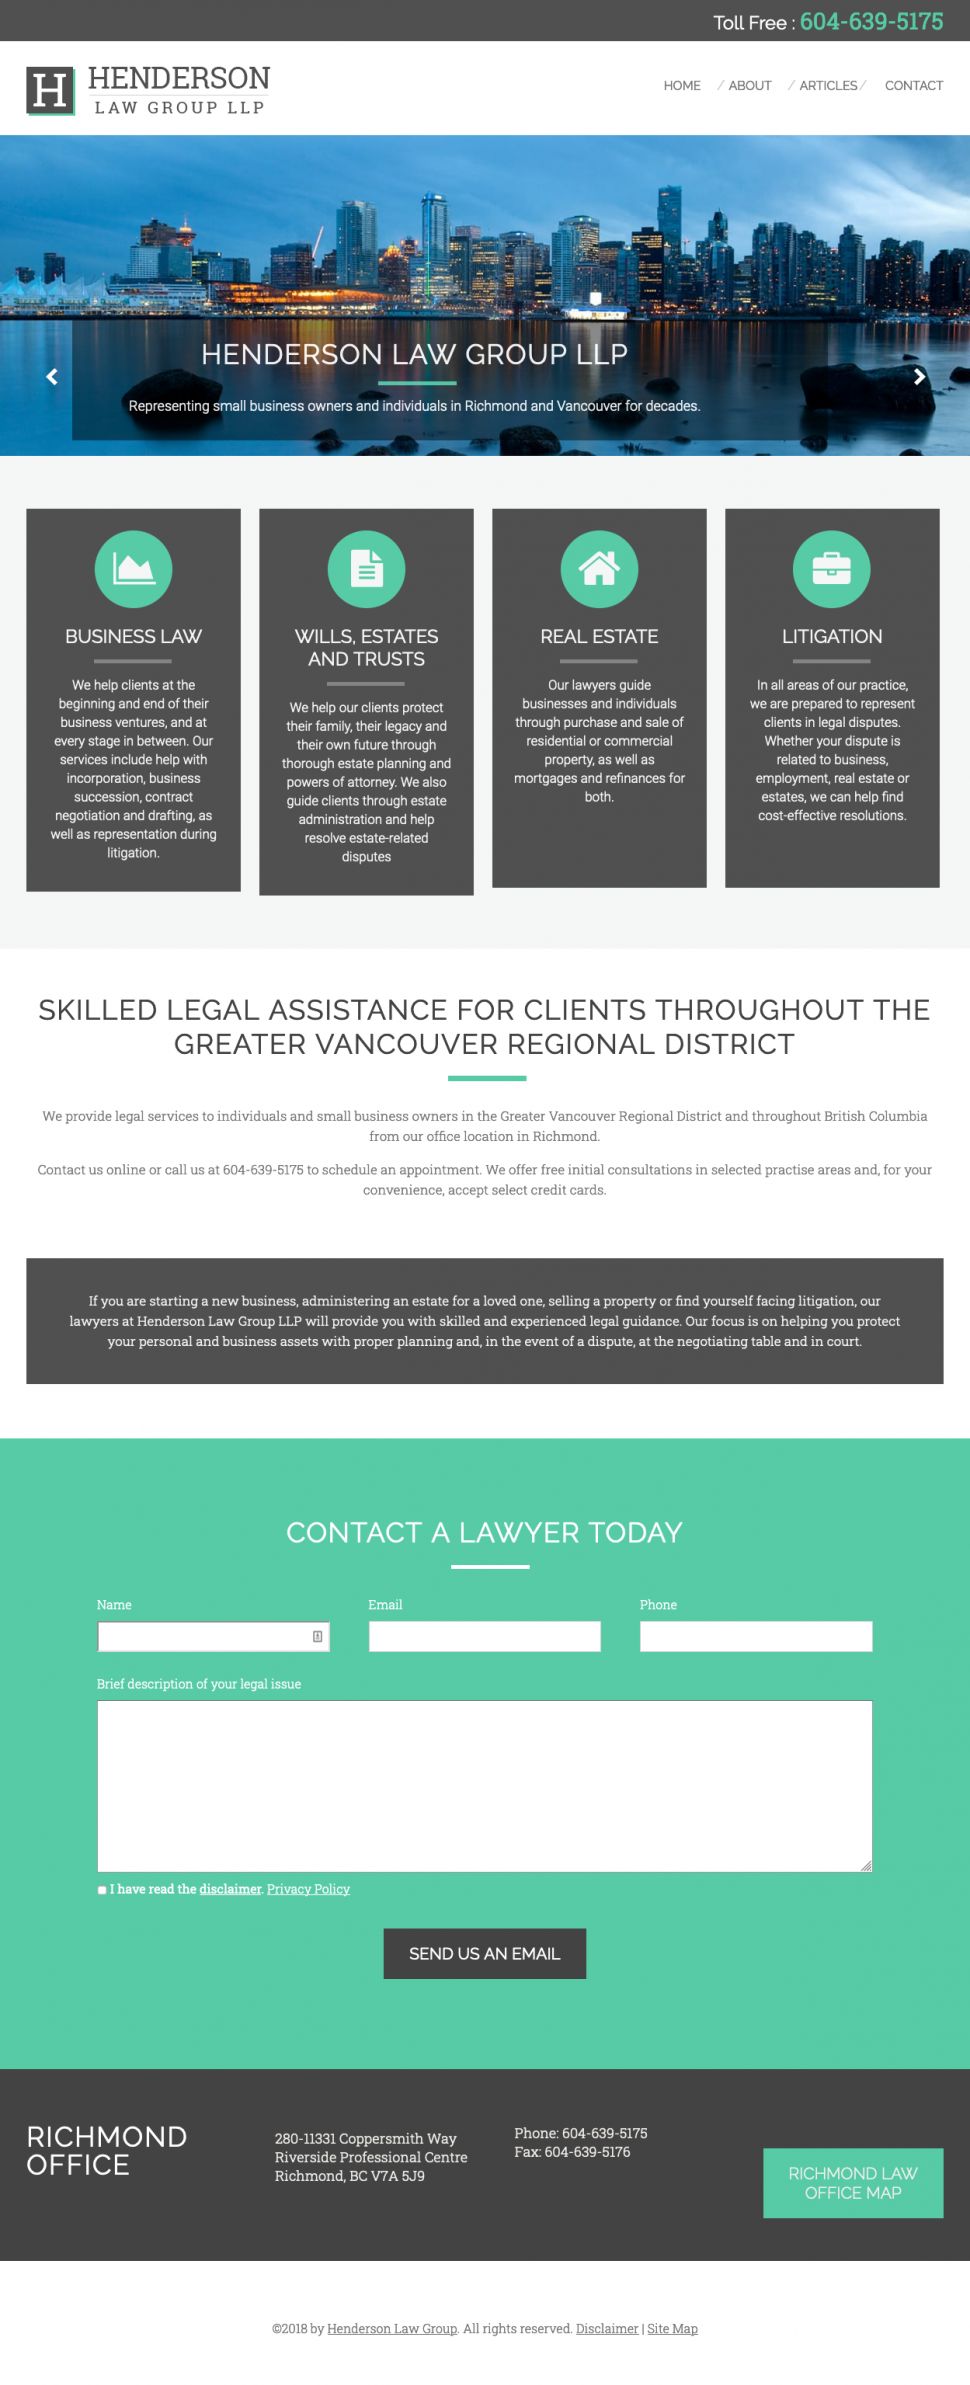 Screenshot of Henderson Law Group website home page.